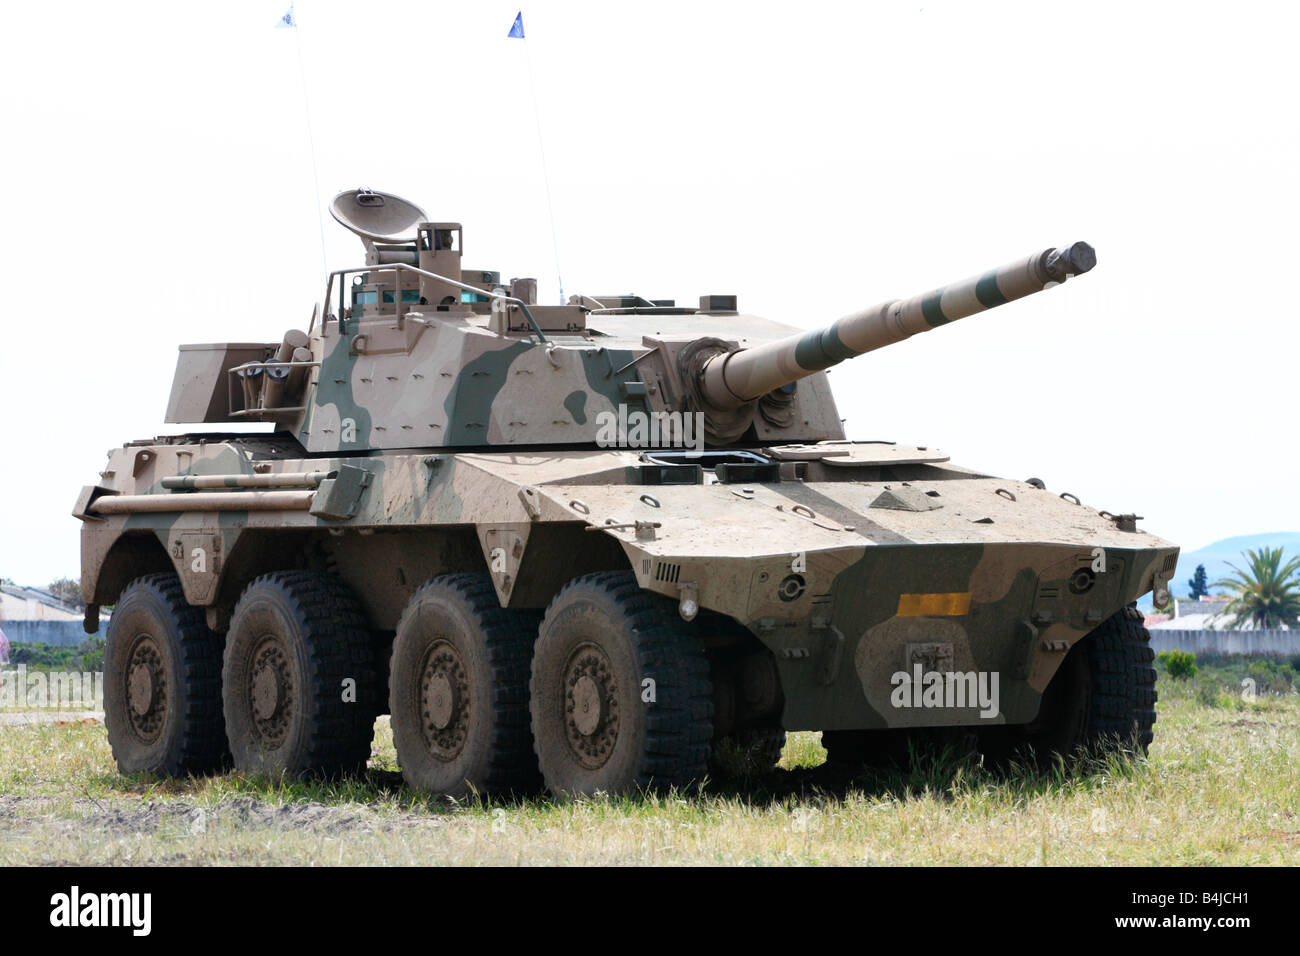 A Rooikat 76 Armoured Fighting Vehicle Stock Photo